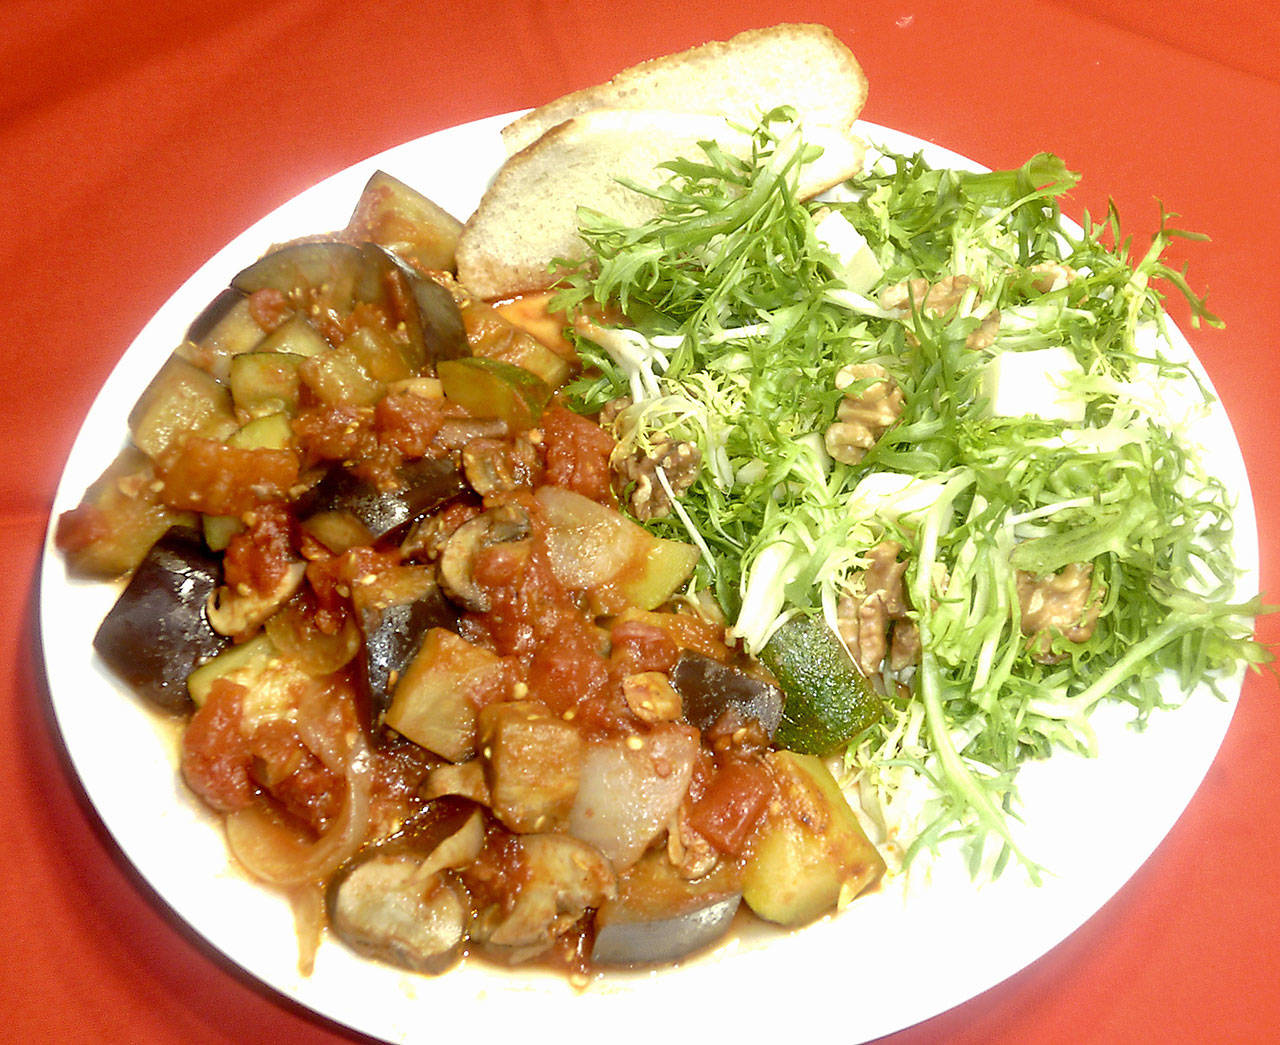 You don’t to stand at the stove for hours to make this simple ratatouille (sauteed Provencal vegetables) with French frisee salad. (Linda Gassenheimer)